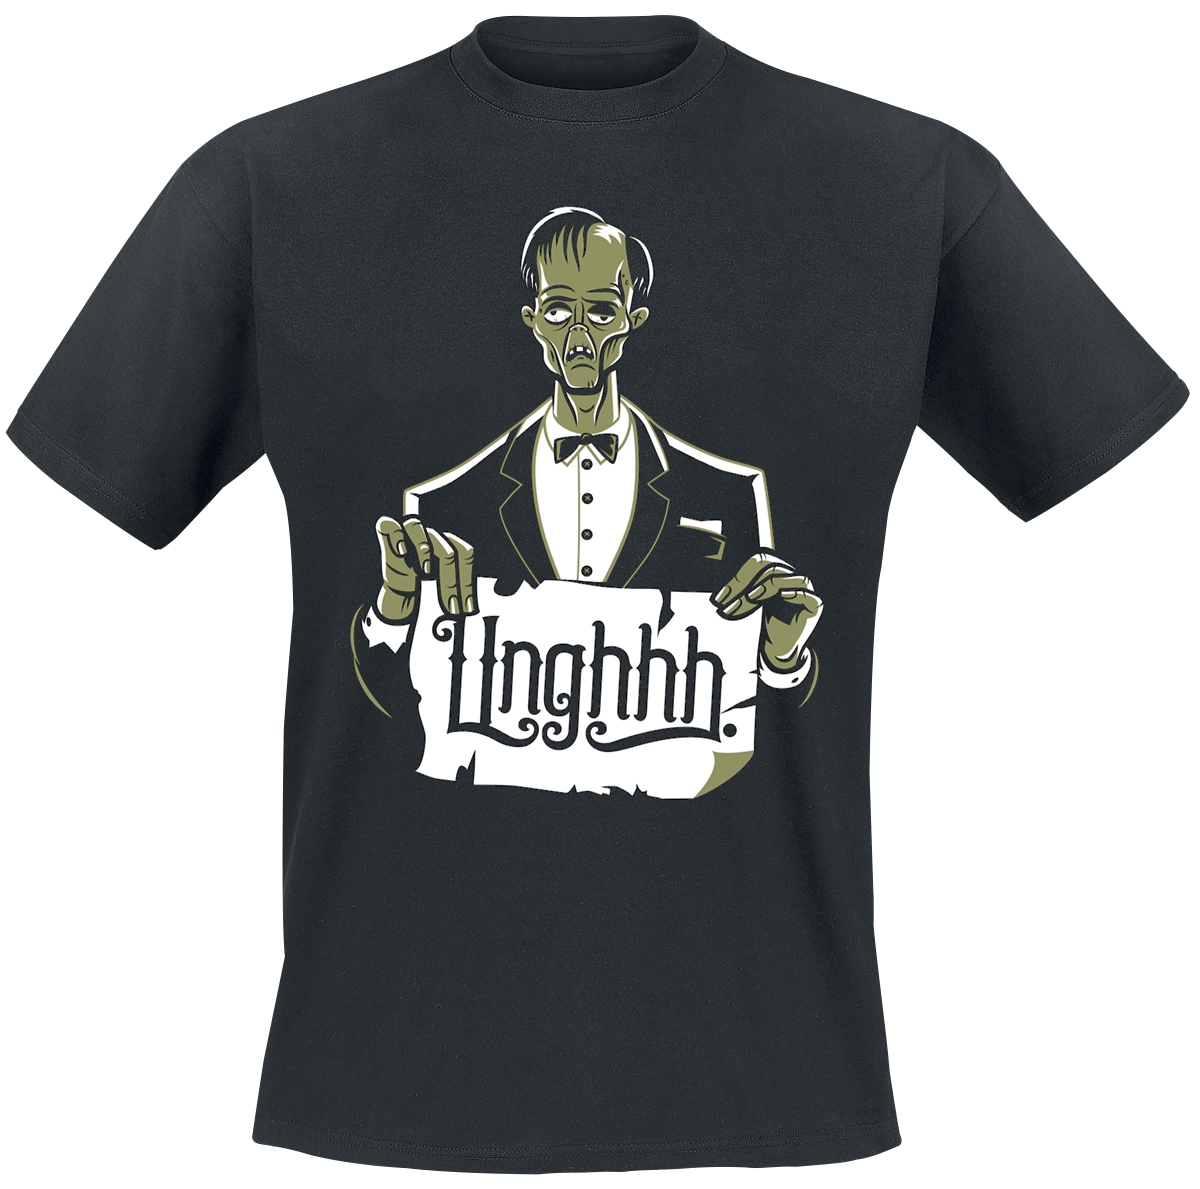 The Addams Family - Unghhh - T-Shirt - black image